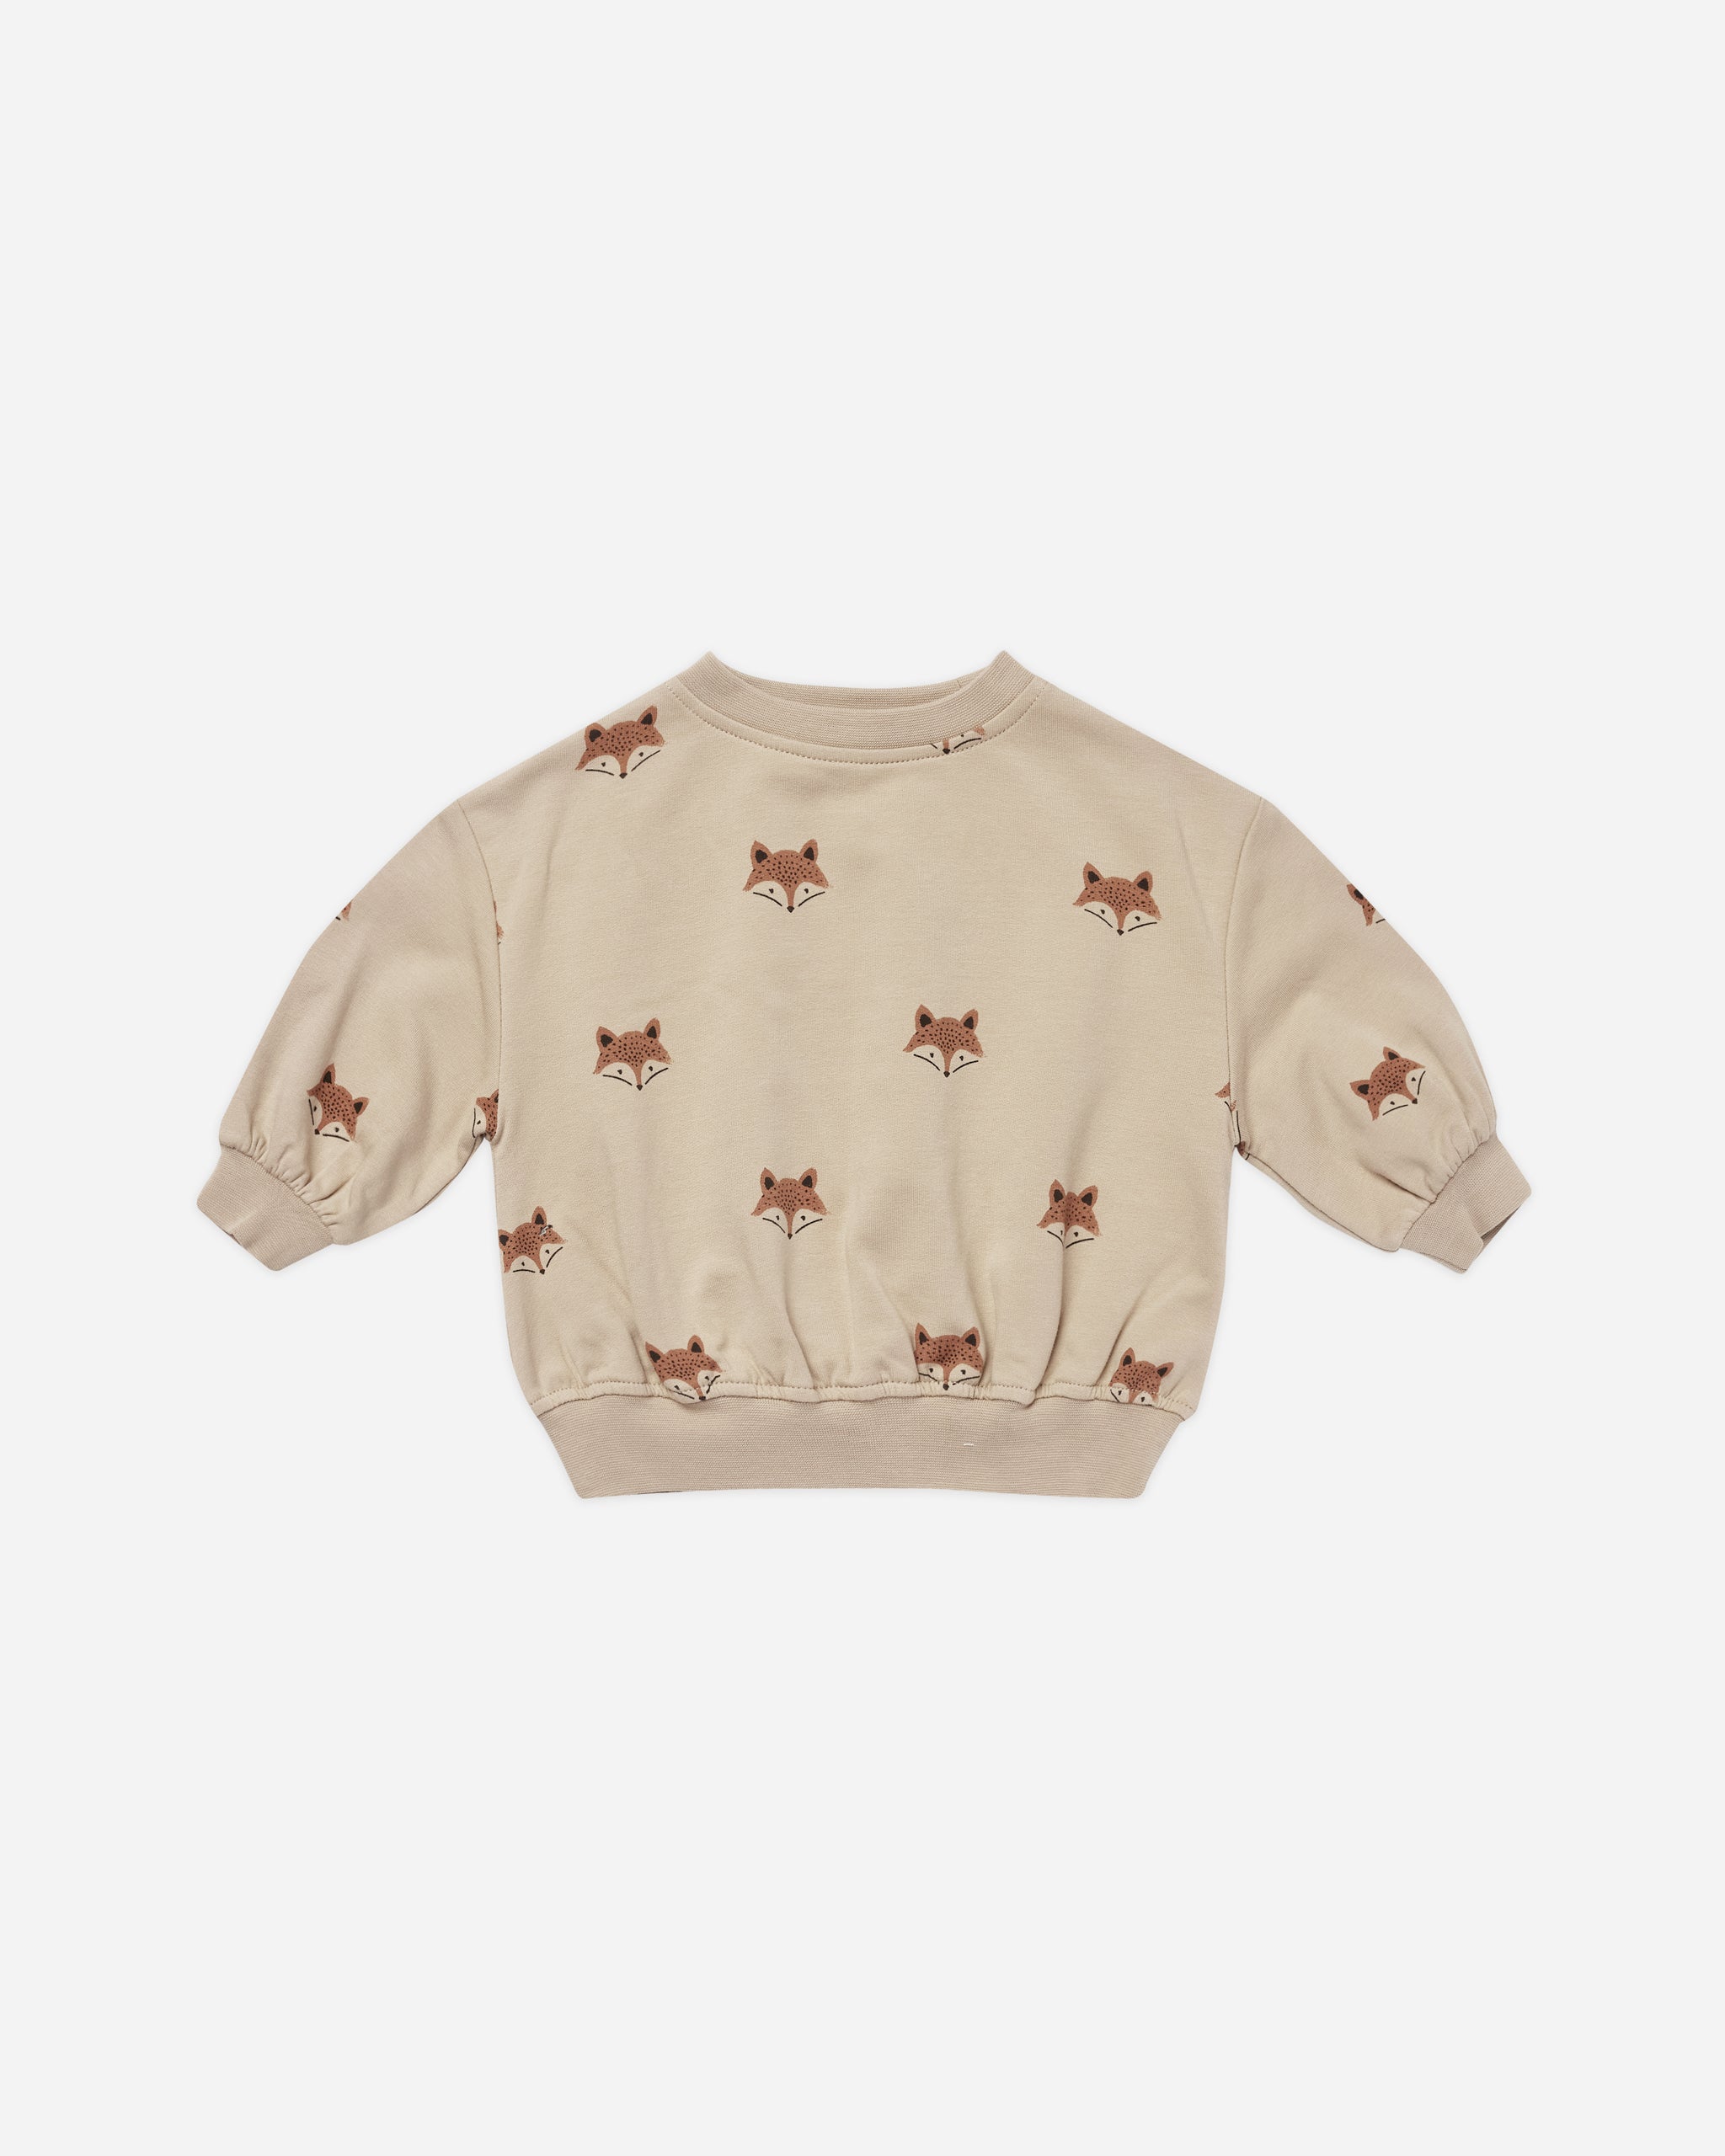 Relaxed Fleece Sweatshirt || Foxes - Rylee + Cru | Kids Clothes | Trendy Baby Clothes | Modern Infant Outfits |